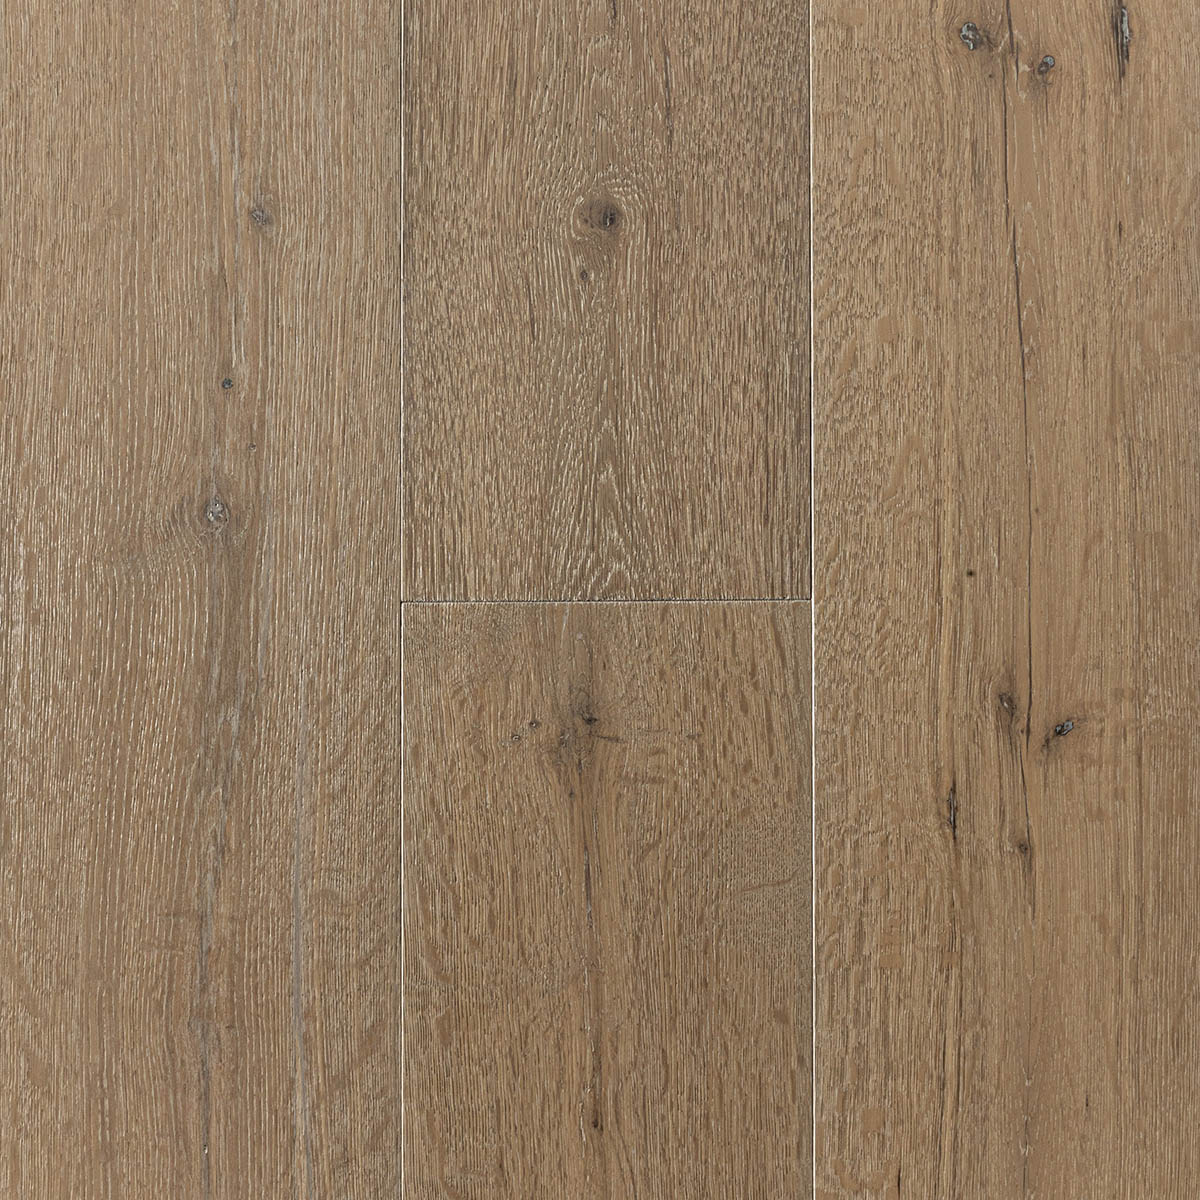 Avery's Row - Lime-Washed Rustic Grade Oak Plank Floor